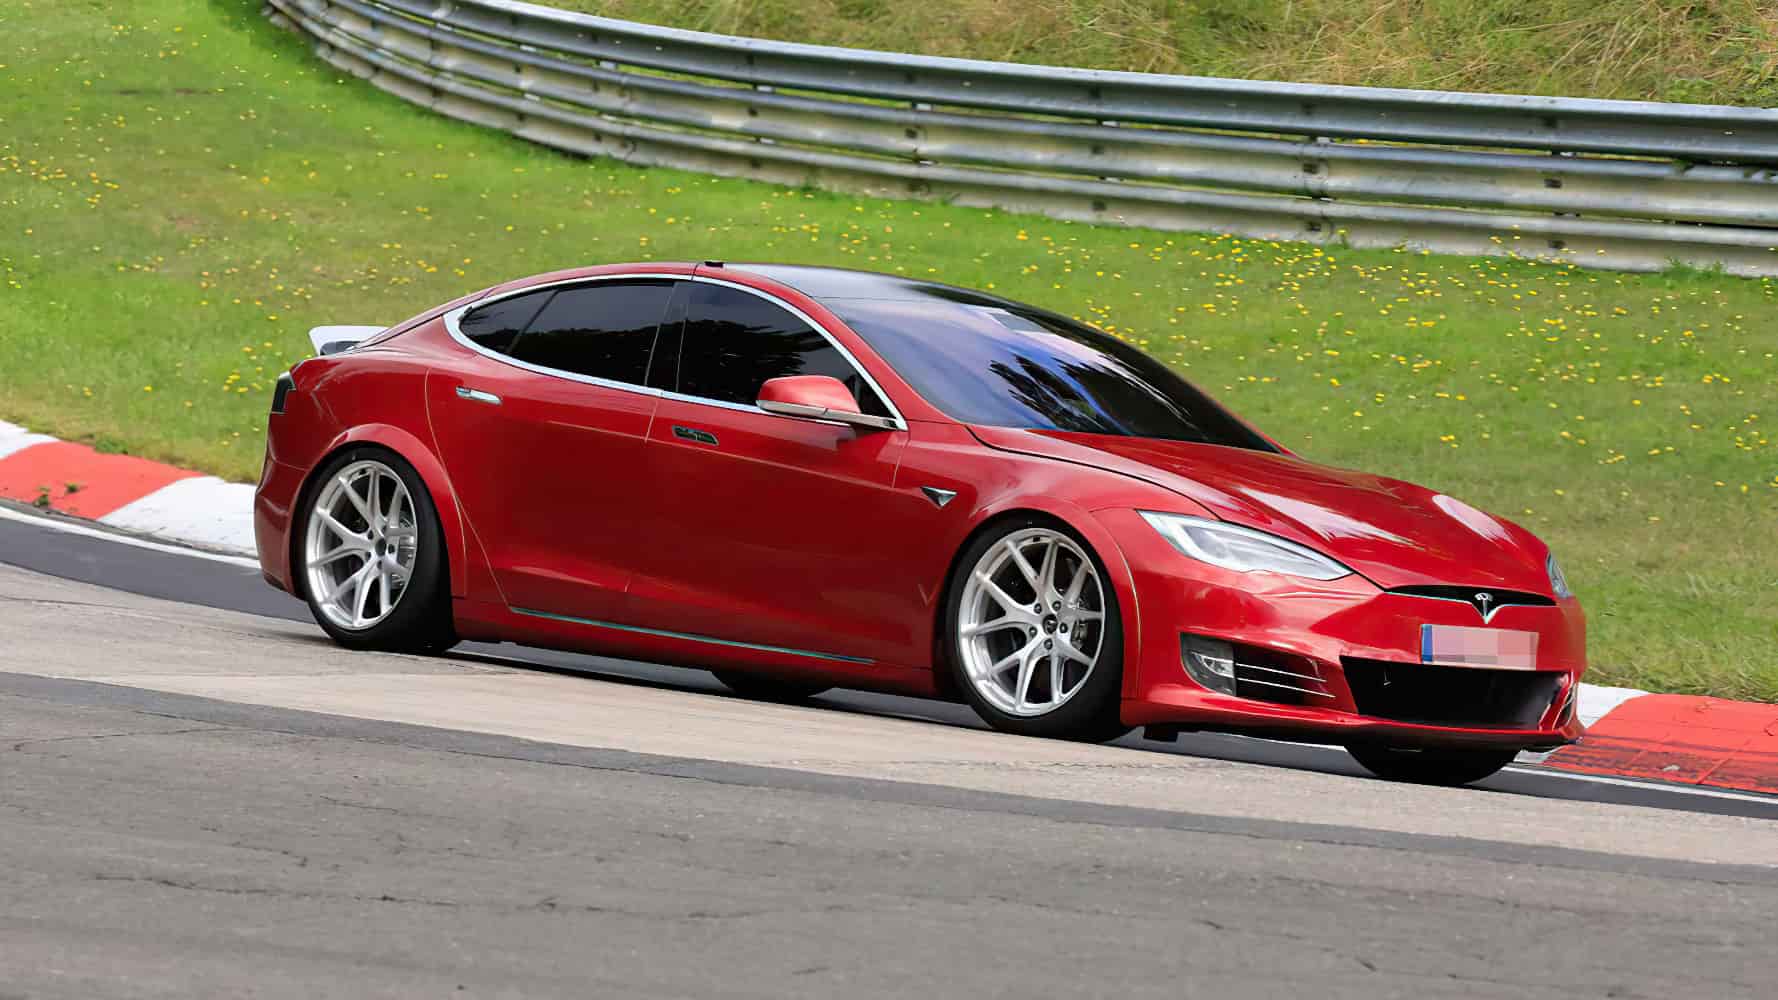 The 2021 Tesla Model S Plaid/ Plaid + expected to come with a wider